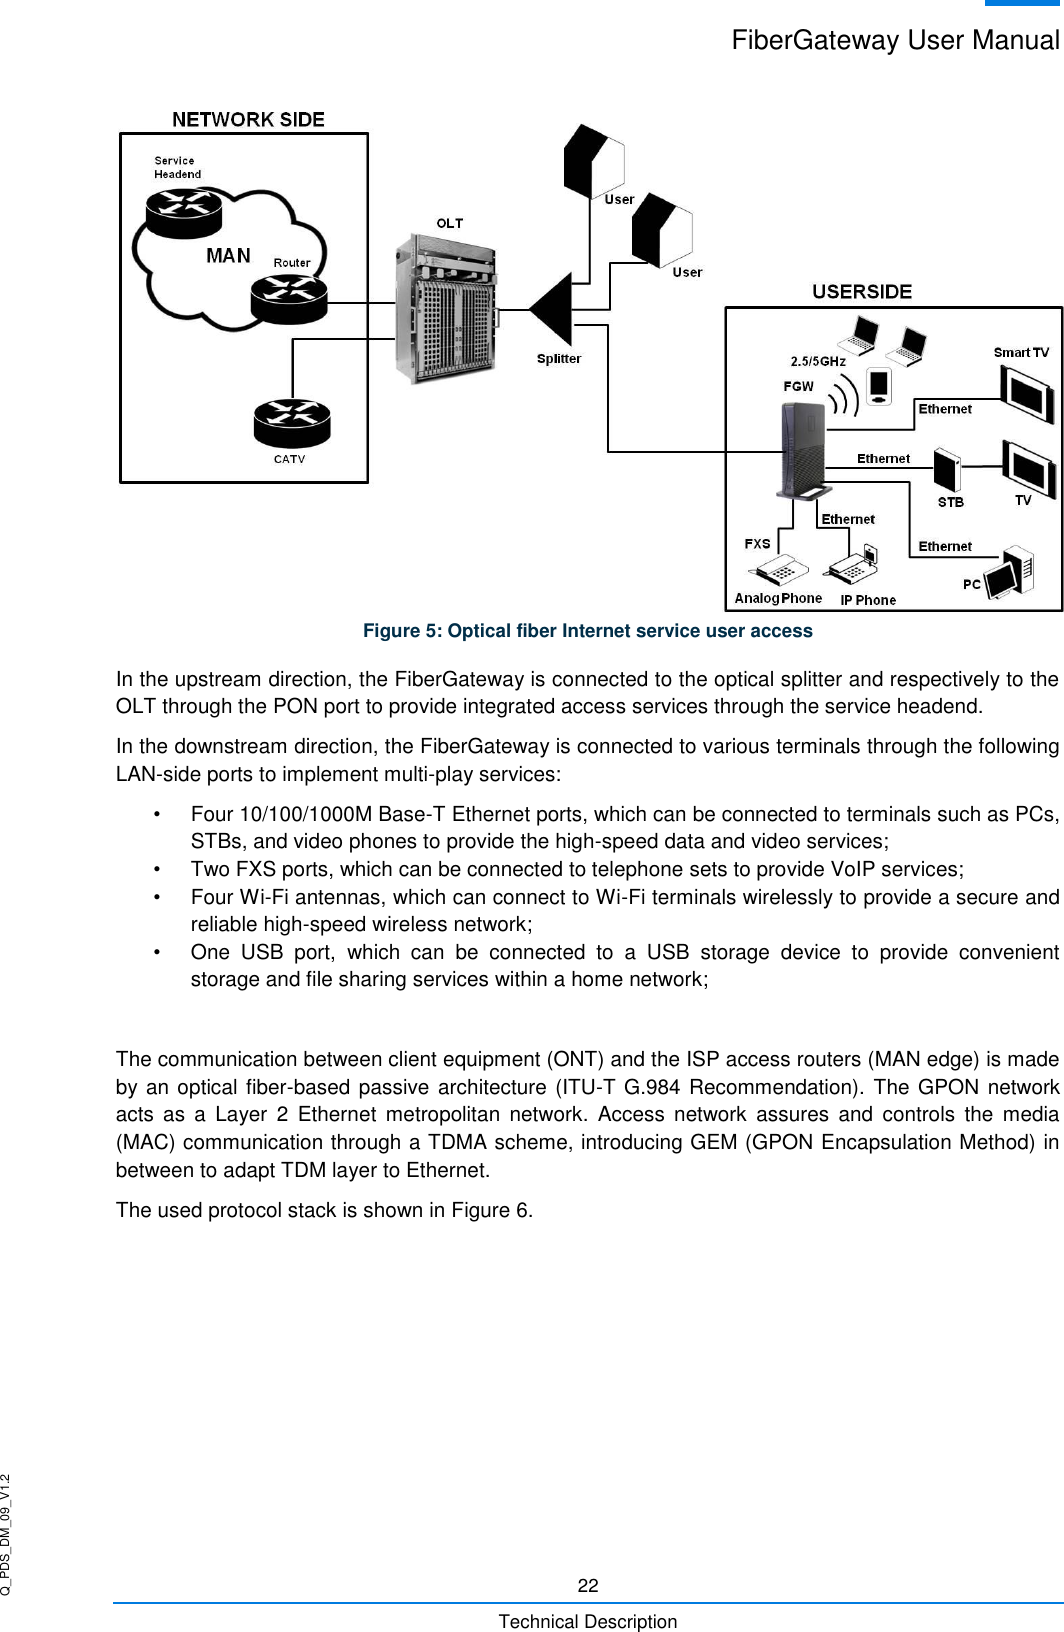 Q_PDS_DM_09_V1.2 FiberGateway User Manual  22 Technical Description  Figure 5: Optical fiber Internet service user access In the upstream direction, the FiberGateway is connected to the optical splitter and respectively to the OLT through the PON port to provide integrated access services through the service headend. In the downstream direction, the FiberGateway is connected to various terminals through the following LAN-side ports to implement multi-play services: •  Four 10/100/1000M Base-T Ethernet ports, which can be connected to terminals such as PCs, STBs, and video phones to provide the high-speed data and video services; •  Two FXS ports, which can be connected to telephone sets to provide VoIP services; •  Four Wi-Fi antennas, which can connect to Wi-Fi terminals wirelessly to provide a secure and reliable high-speed wireless network; •  One  USB  port,  which  can  be  connected  to  a  USB  storage  device  to  provide  convenient storage and file sharing services within a home network;  The communication between client equipment (ONT) and the ISP access routers (MAN edge) is made by an optical fiber-based passive architecture (ITU-T G.984 Recommendation). The GPON network acts  as  a  Layer  2  Ethernet  metropolitan  network.  Access  network  assures  and  controls  the  media (MAC) communication through a TDMA scheme, introducing GEM (GPON Encapsulation Method) in between to adapt TDM layer to Ethernet. The used protocol stack is shown in Figure 6. 